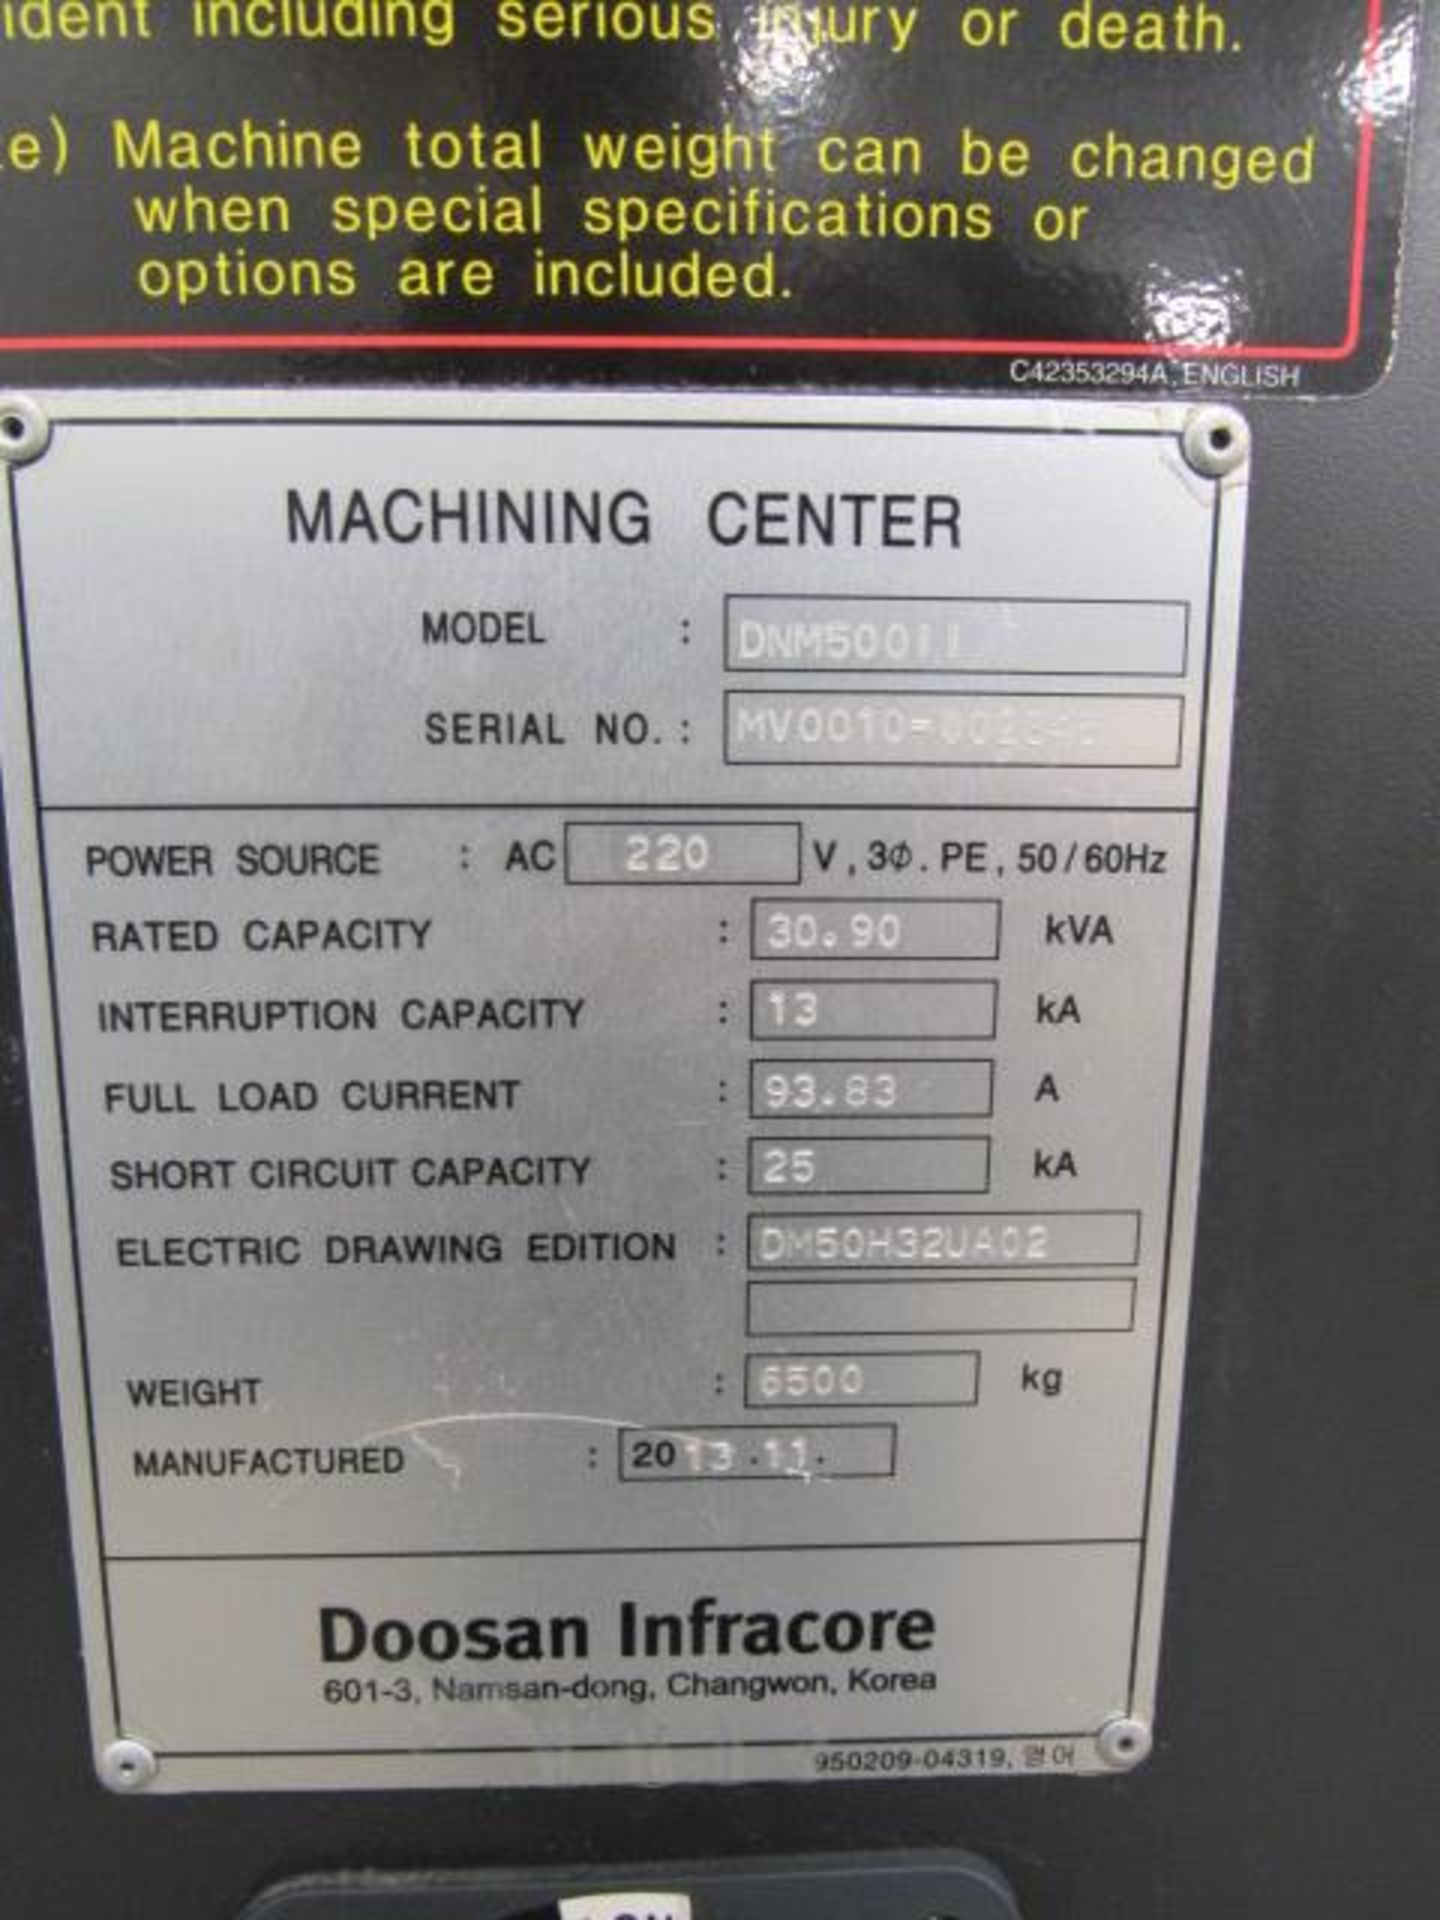 Doosan DNM 500 II CNC Vertical Machining Centers with 47.2'' x 21.2'' Tables, Big Plus #40, - Image 8 of 9